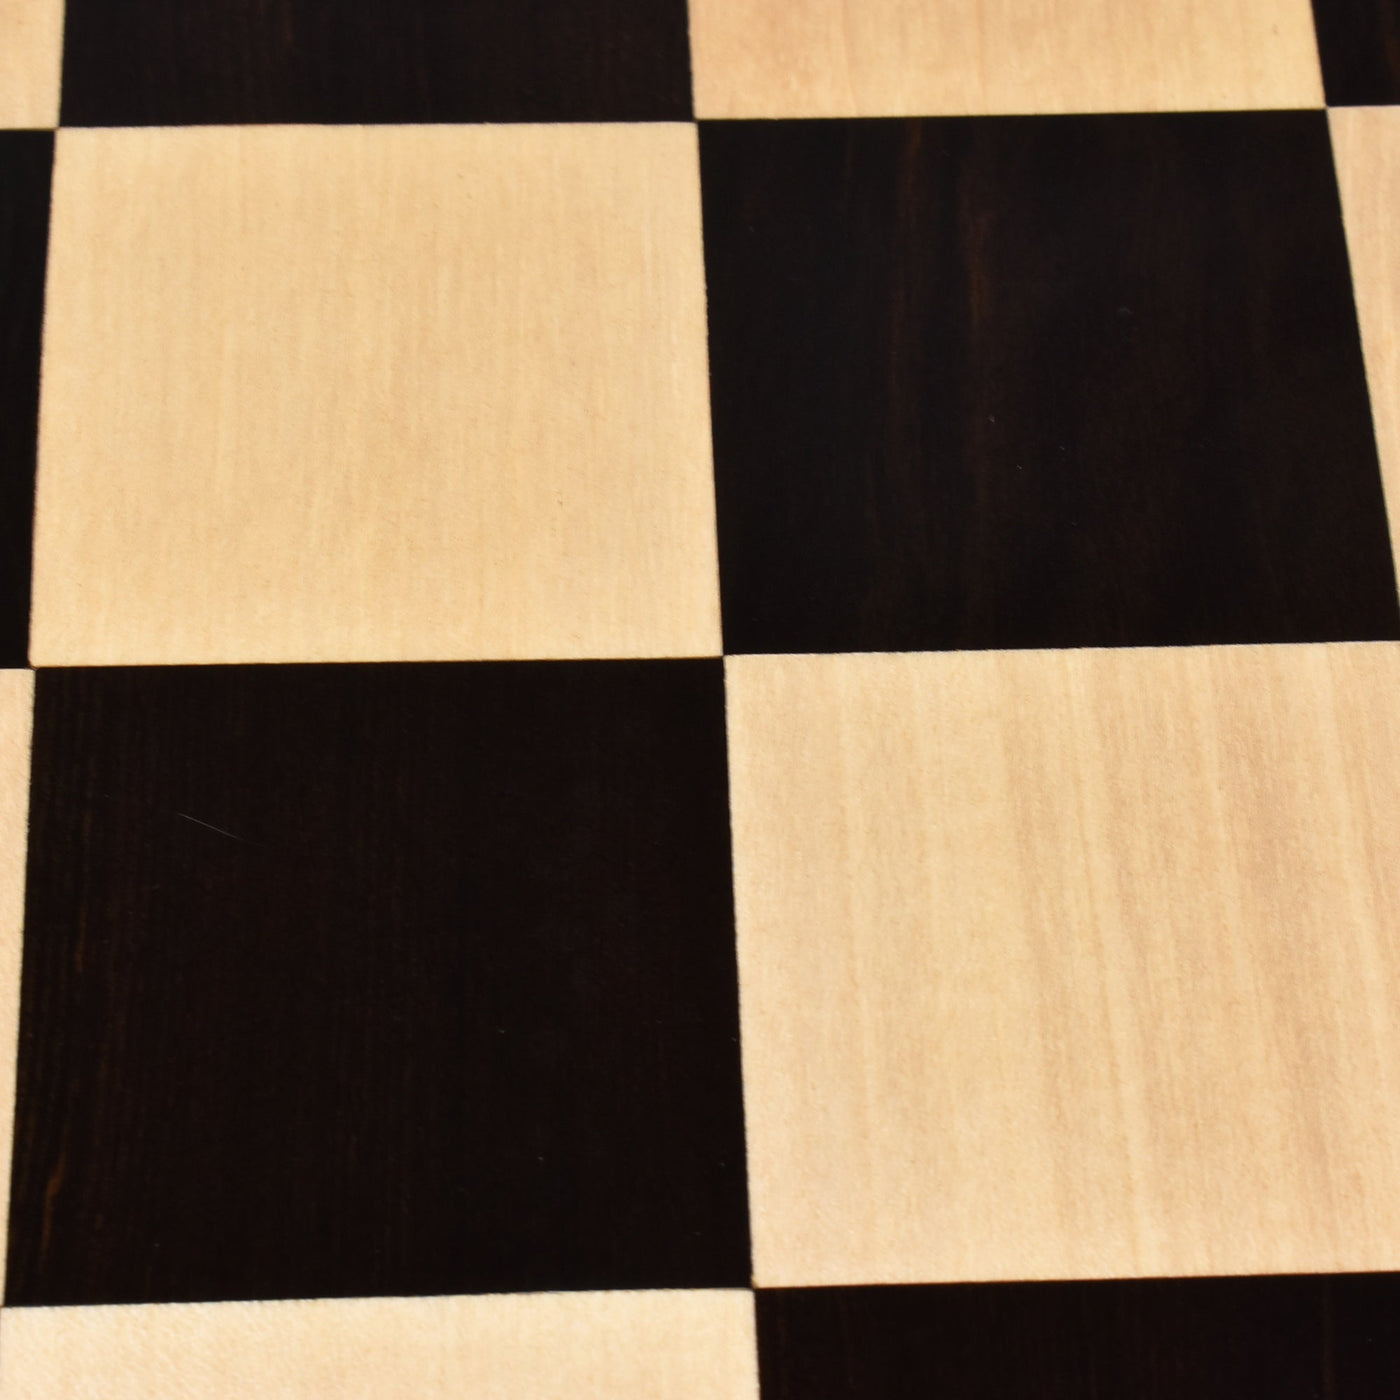 Combo of 3.8" Imperial Staunton Luxury Chess Set - Pieces in Ebony Wood with 21" Ebony Board